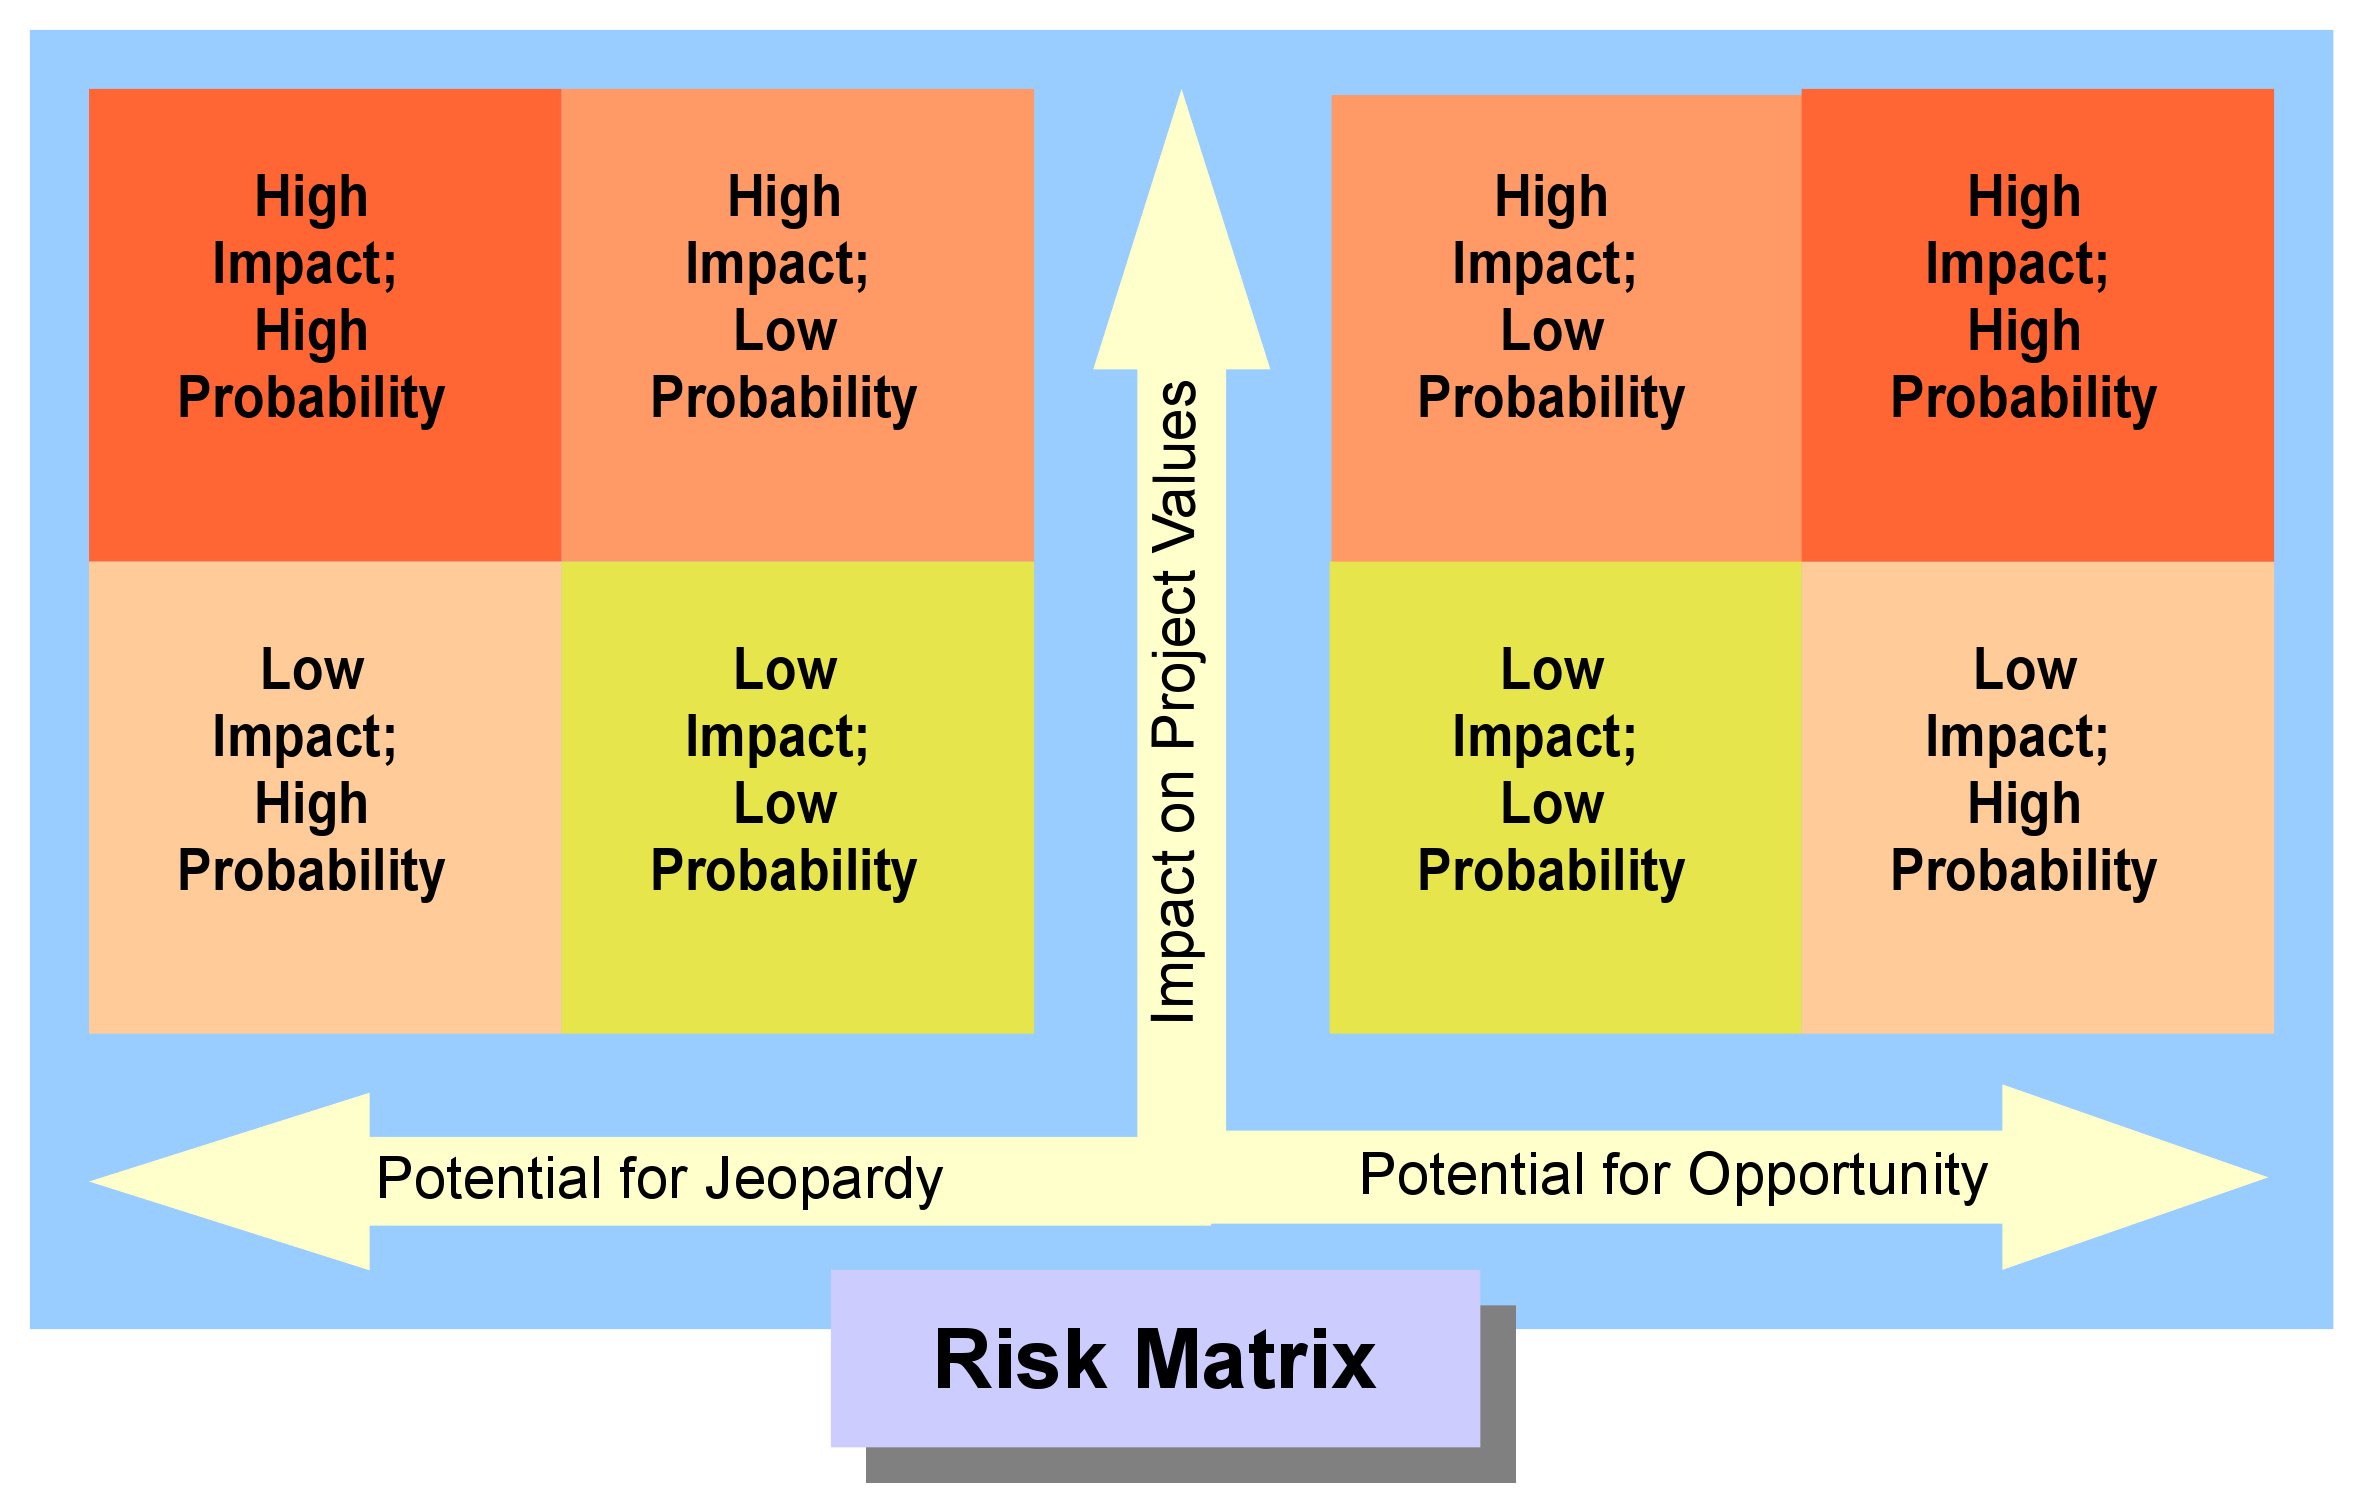 wha t is an example of a medium risk